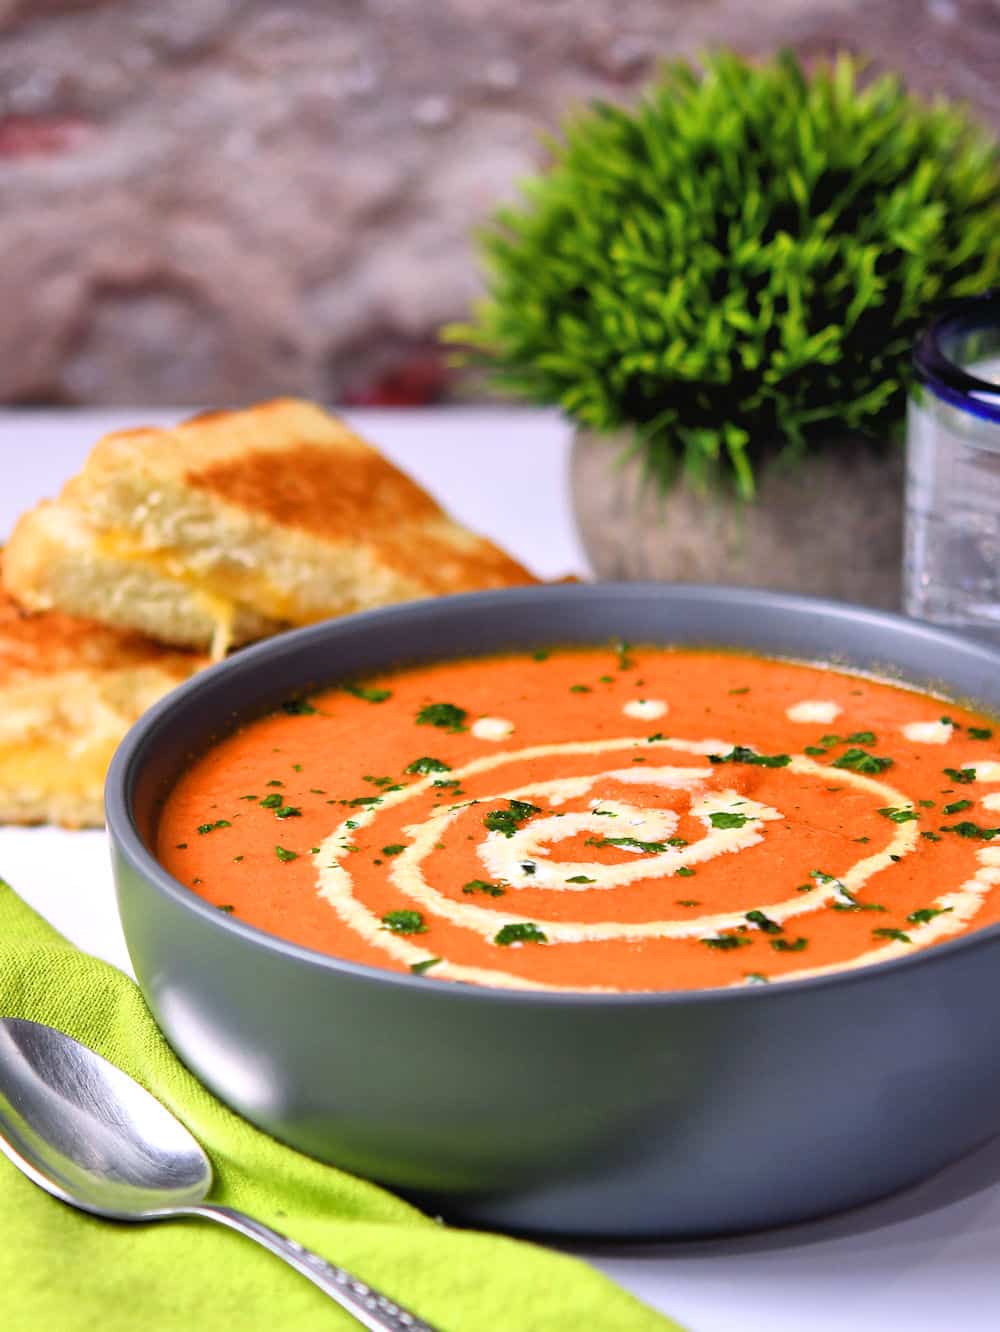 24Bite: Tomato Pepper Soup with Roasted Red Peppers recipe by Christian Guzman